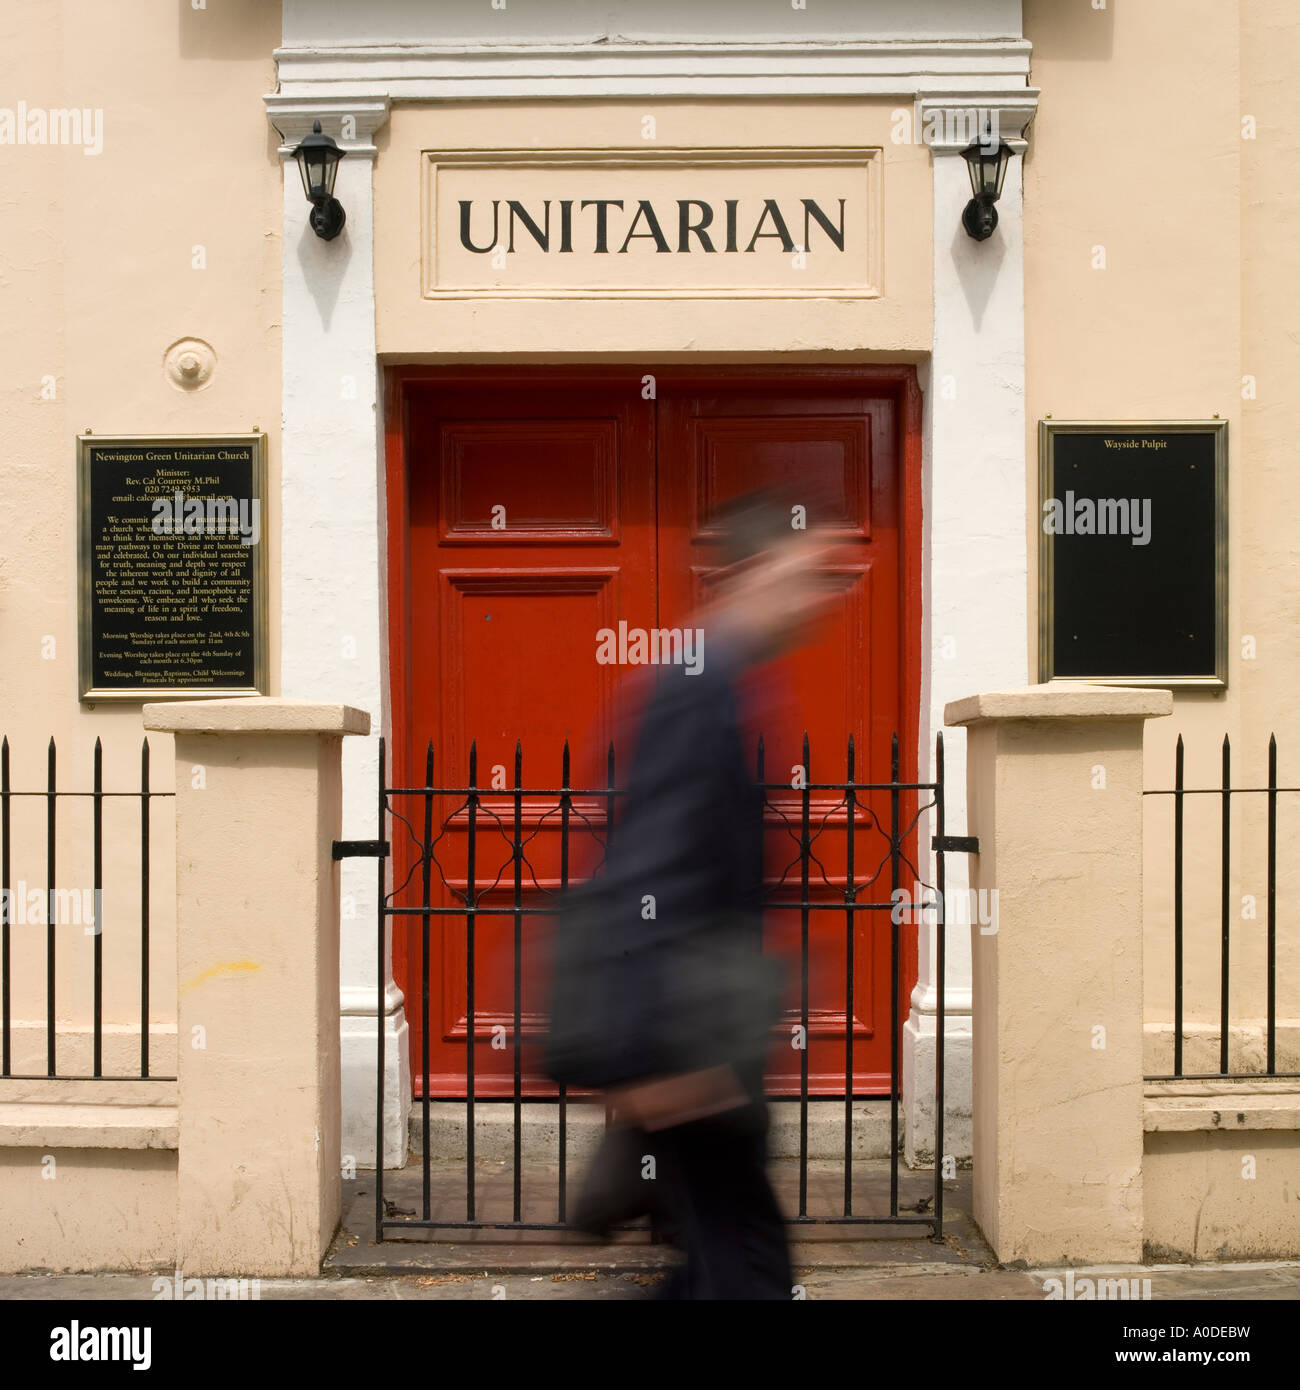 Unitarian Chapel  no model release required as silhouette, shadow, movement blur makes male figure unrecognisable Stock Photo